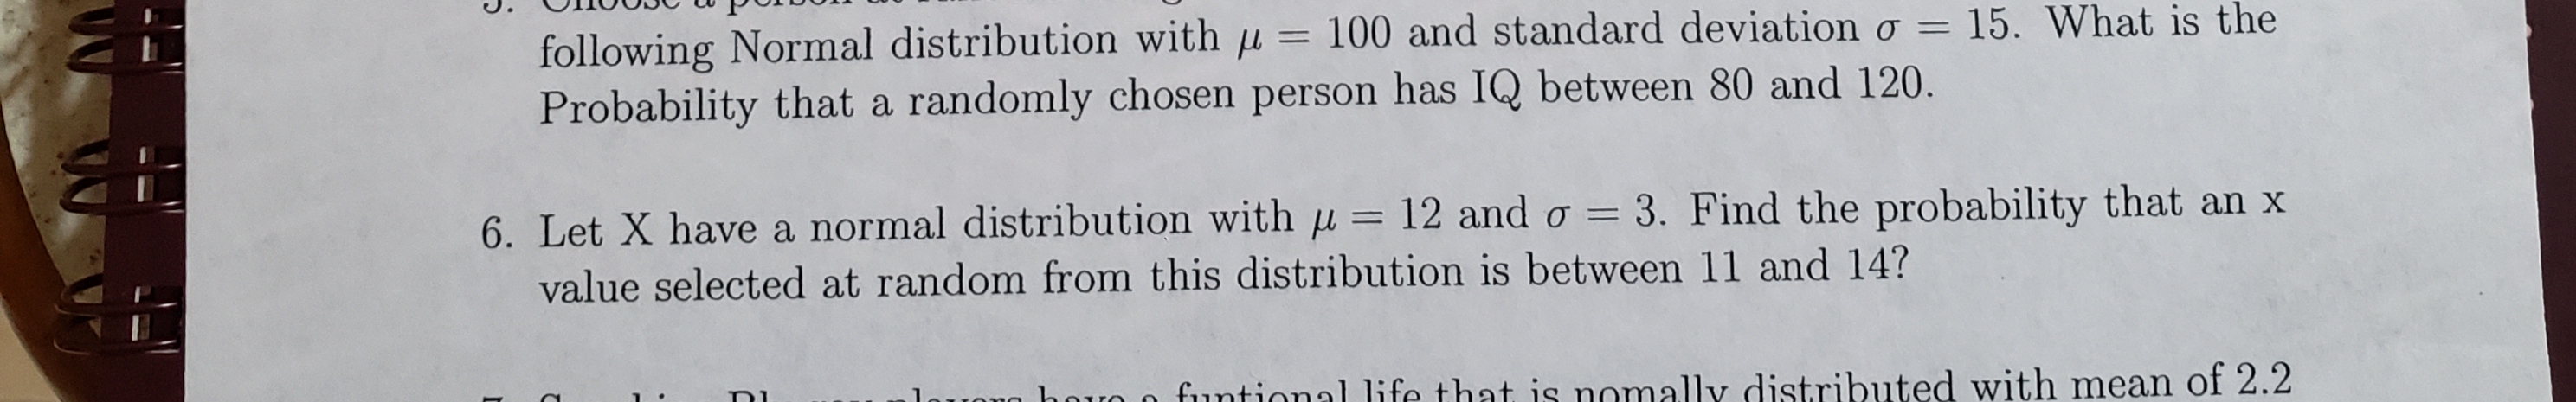 following Normal distribution with u = 100 and standard deviation o = 15. What is the
Probability that a randomly chosen person has IQ between 80 and 120.
6. Let X have a normal distribution with u = 12 and o 3. Find the probability that an x
value selected at random from this distribution is between 11 and 14?
funtional life that is nomally distributed with mean of 2.2
Di
